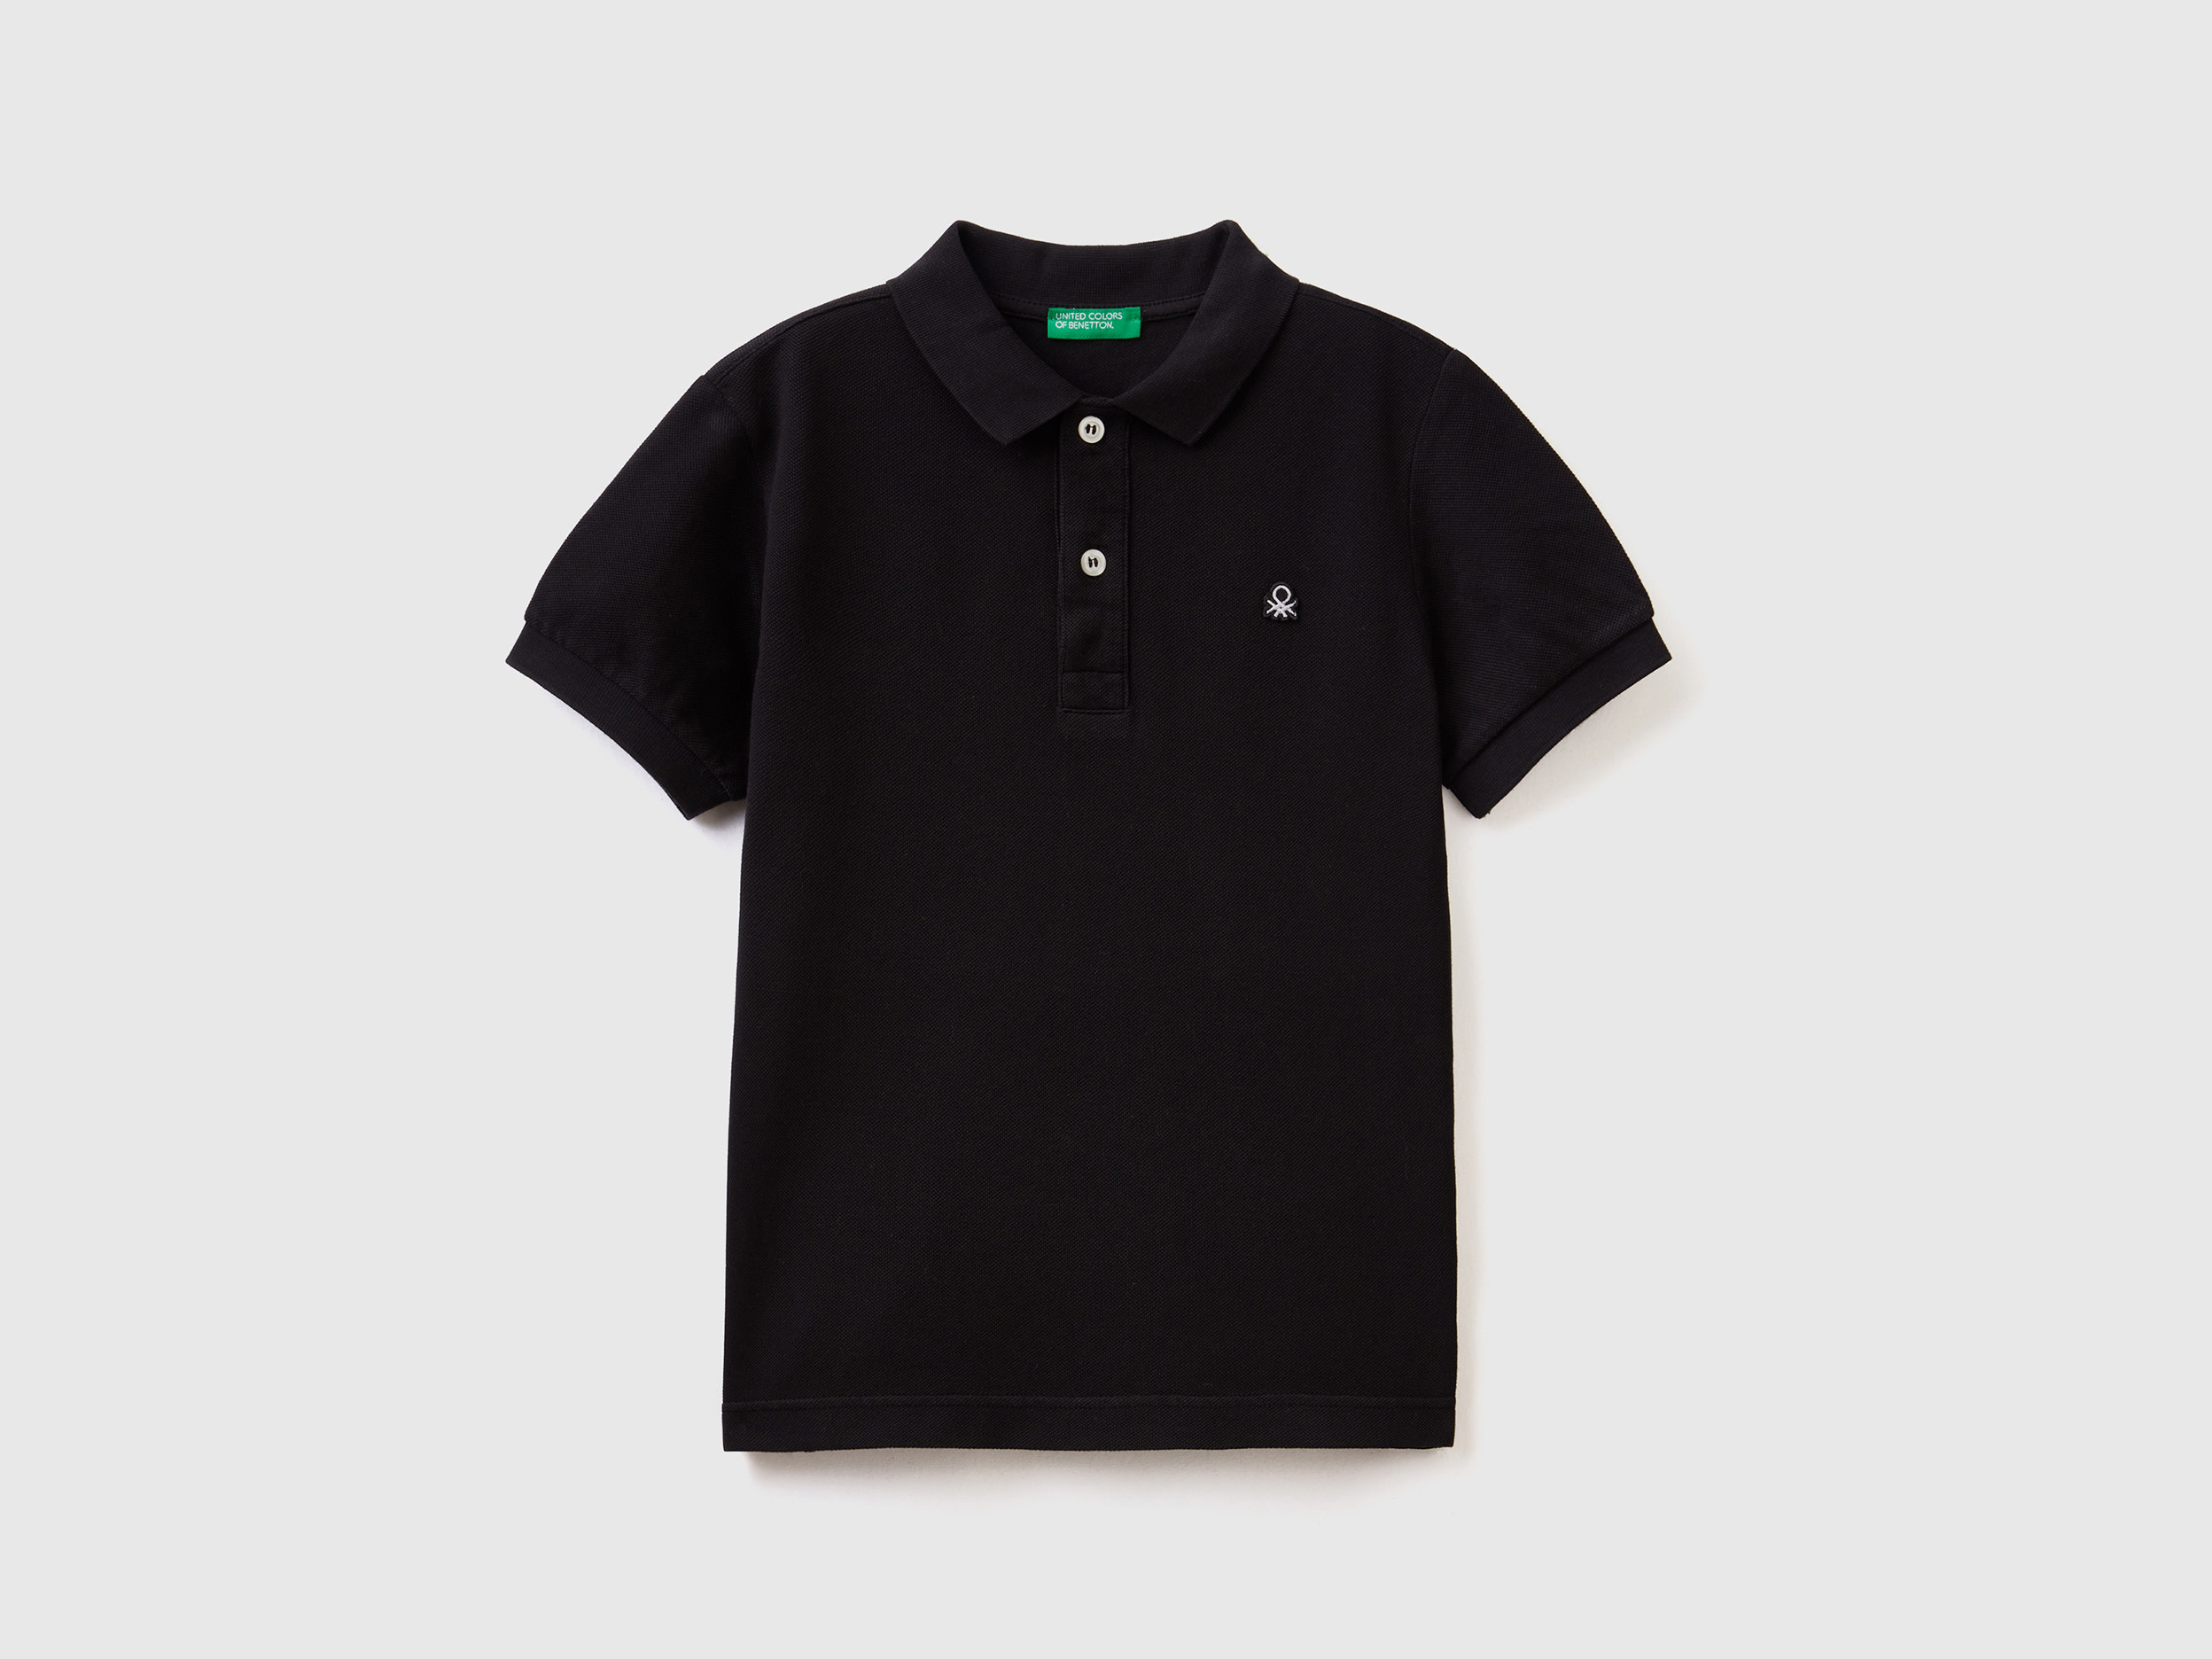 Image of Benetton, Slim Fit Polo In 100% Organic Cotton, size L, Black, Kids